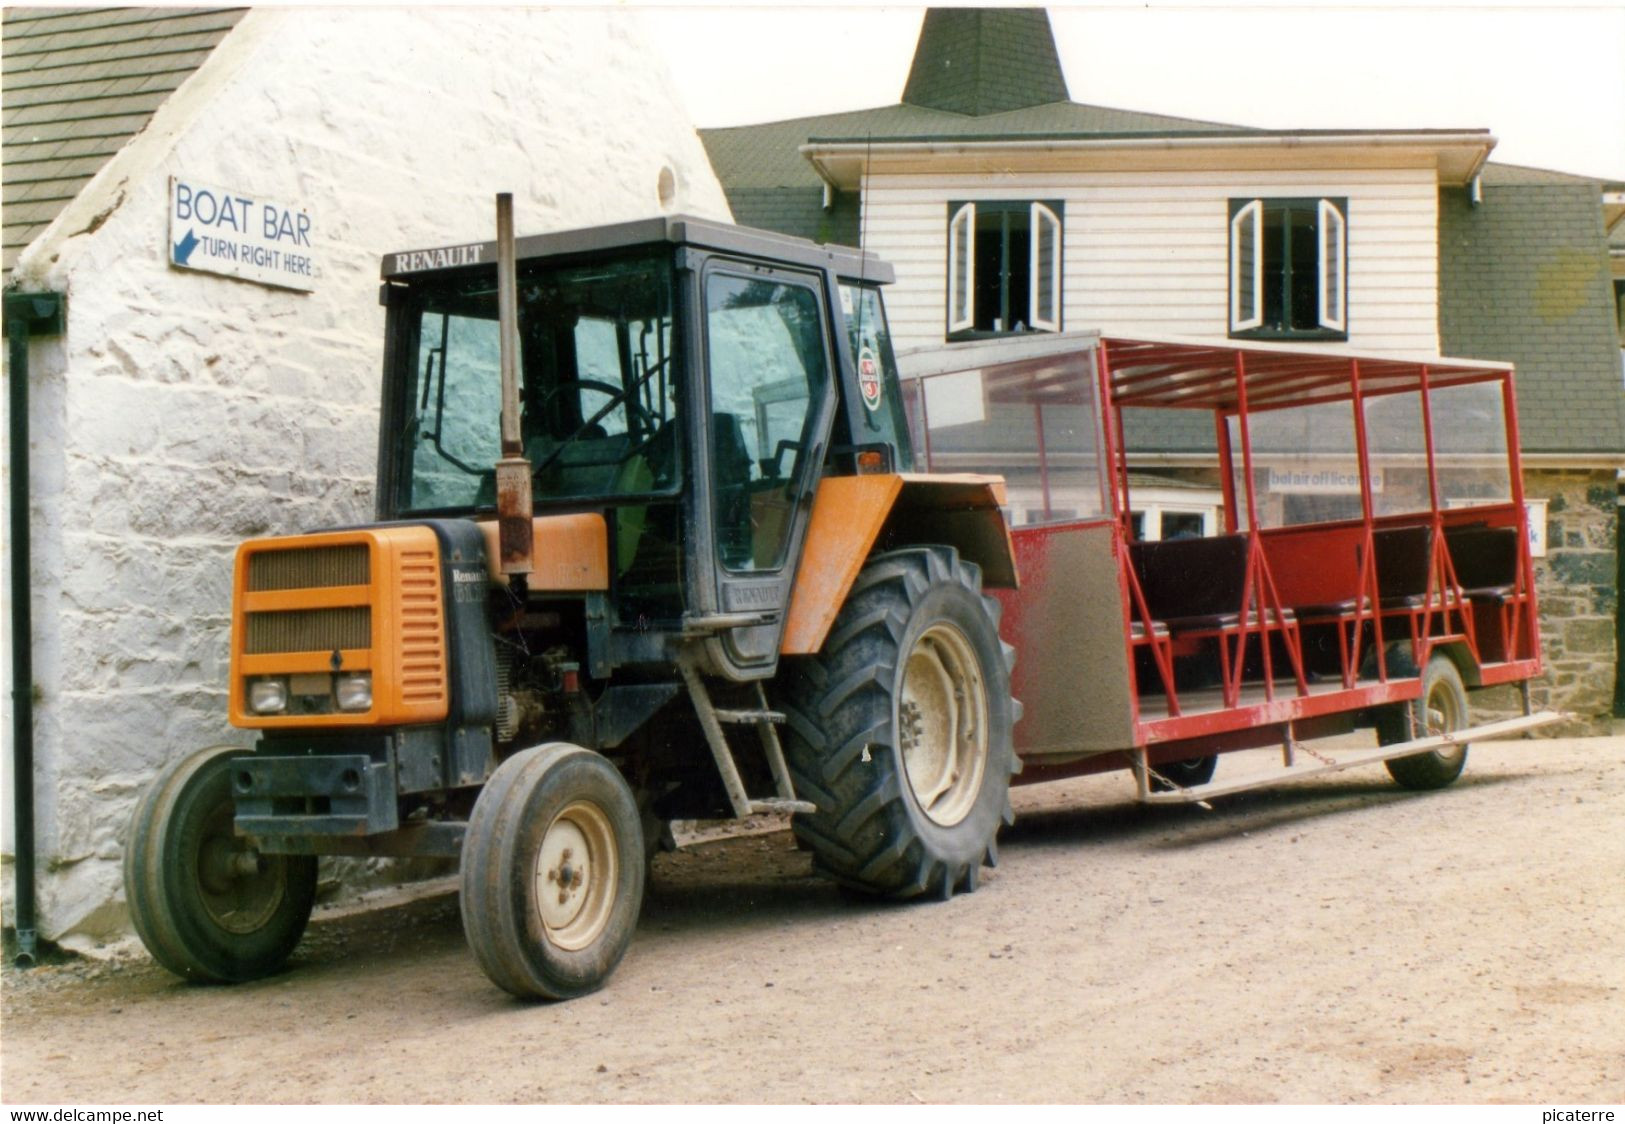 Postcard Size Photograph-Tractor & Trailer/bus(known Locally As The 'toast Rack') Parked At Top Of Sark Hill - Sark